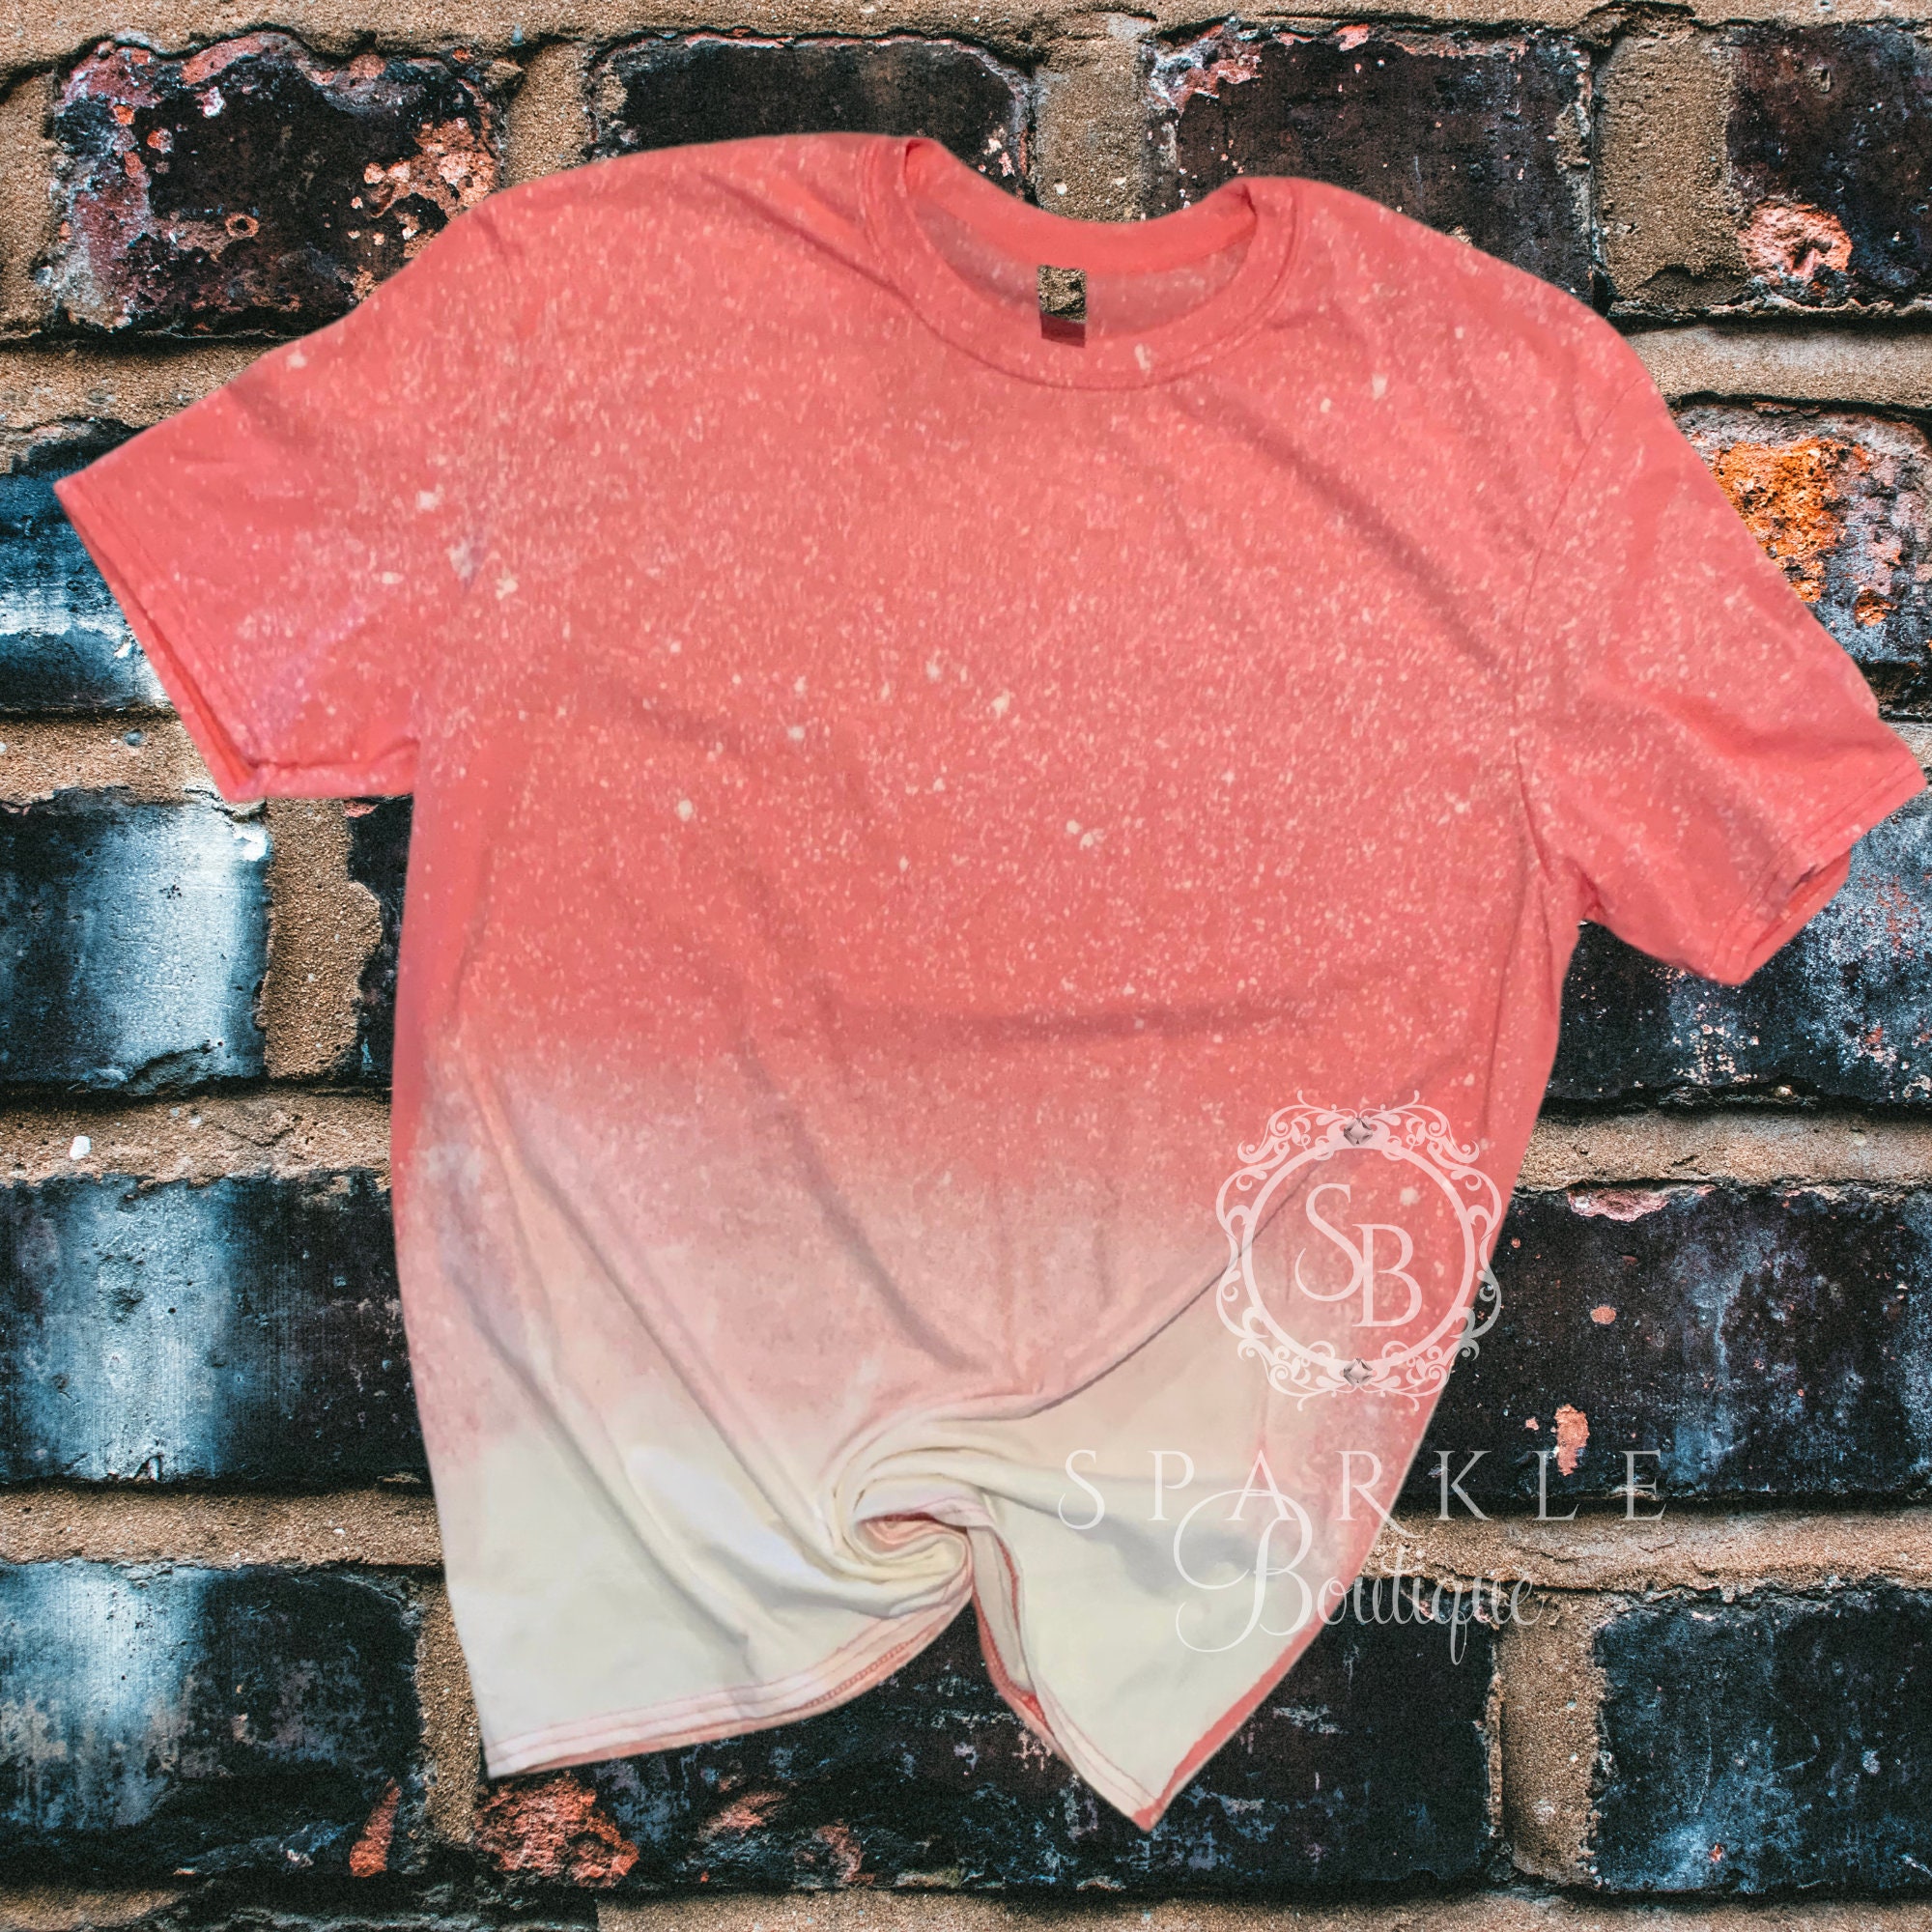 Pink Ombre Tie Dye T-shirt -  Canada